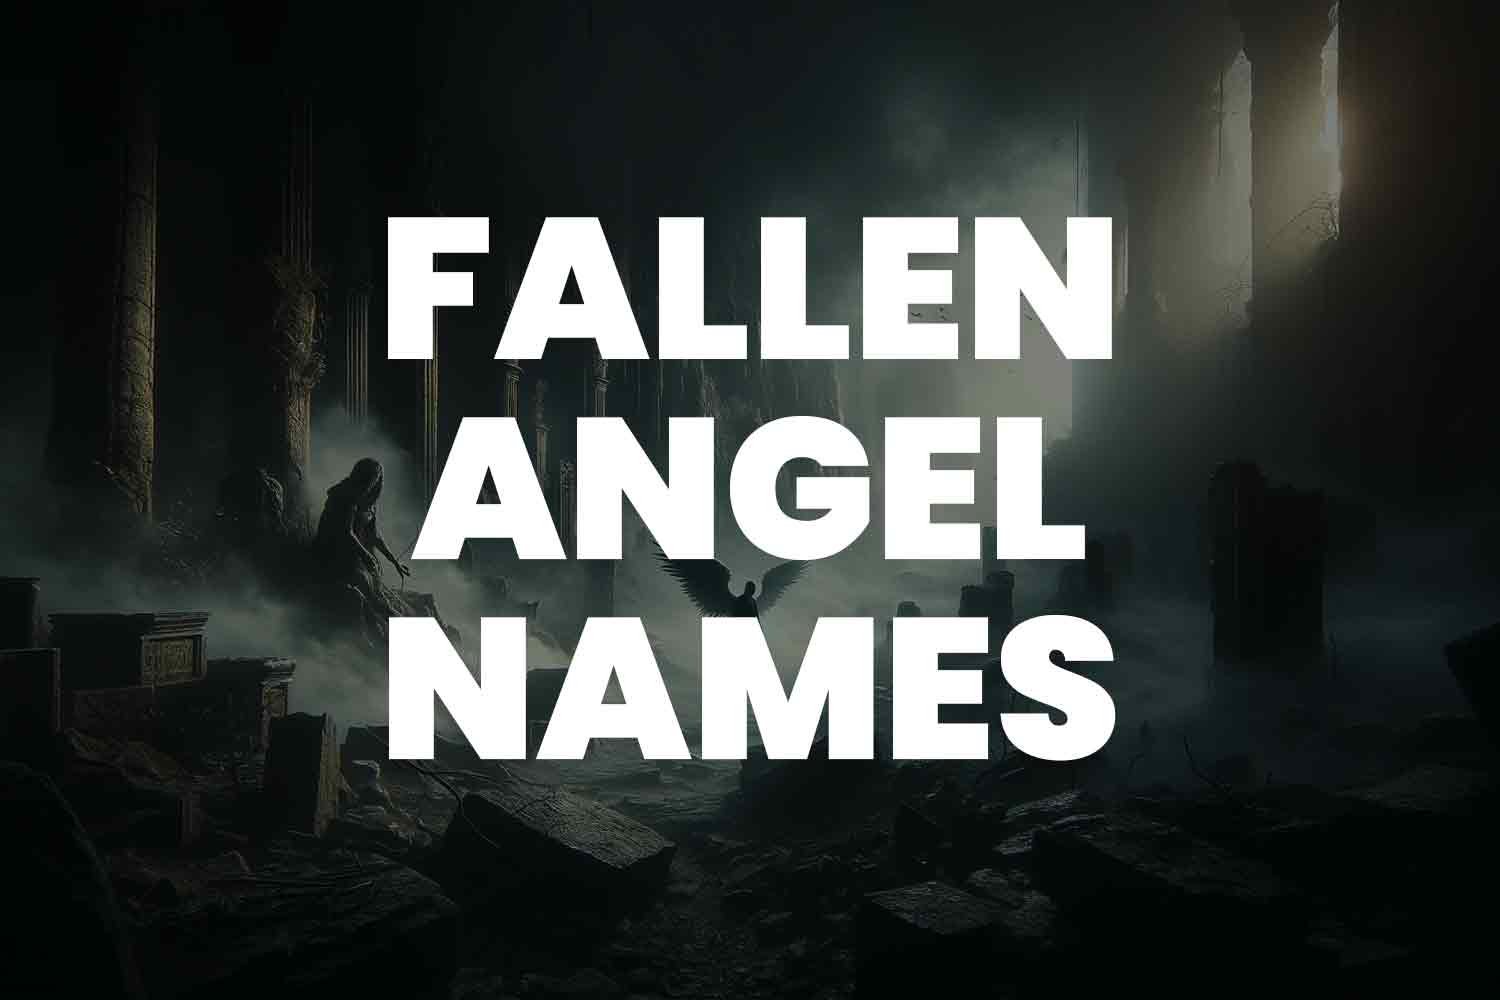 Are We Fallen Angels?. Fallen Angel-Art created by author.